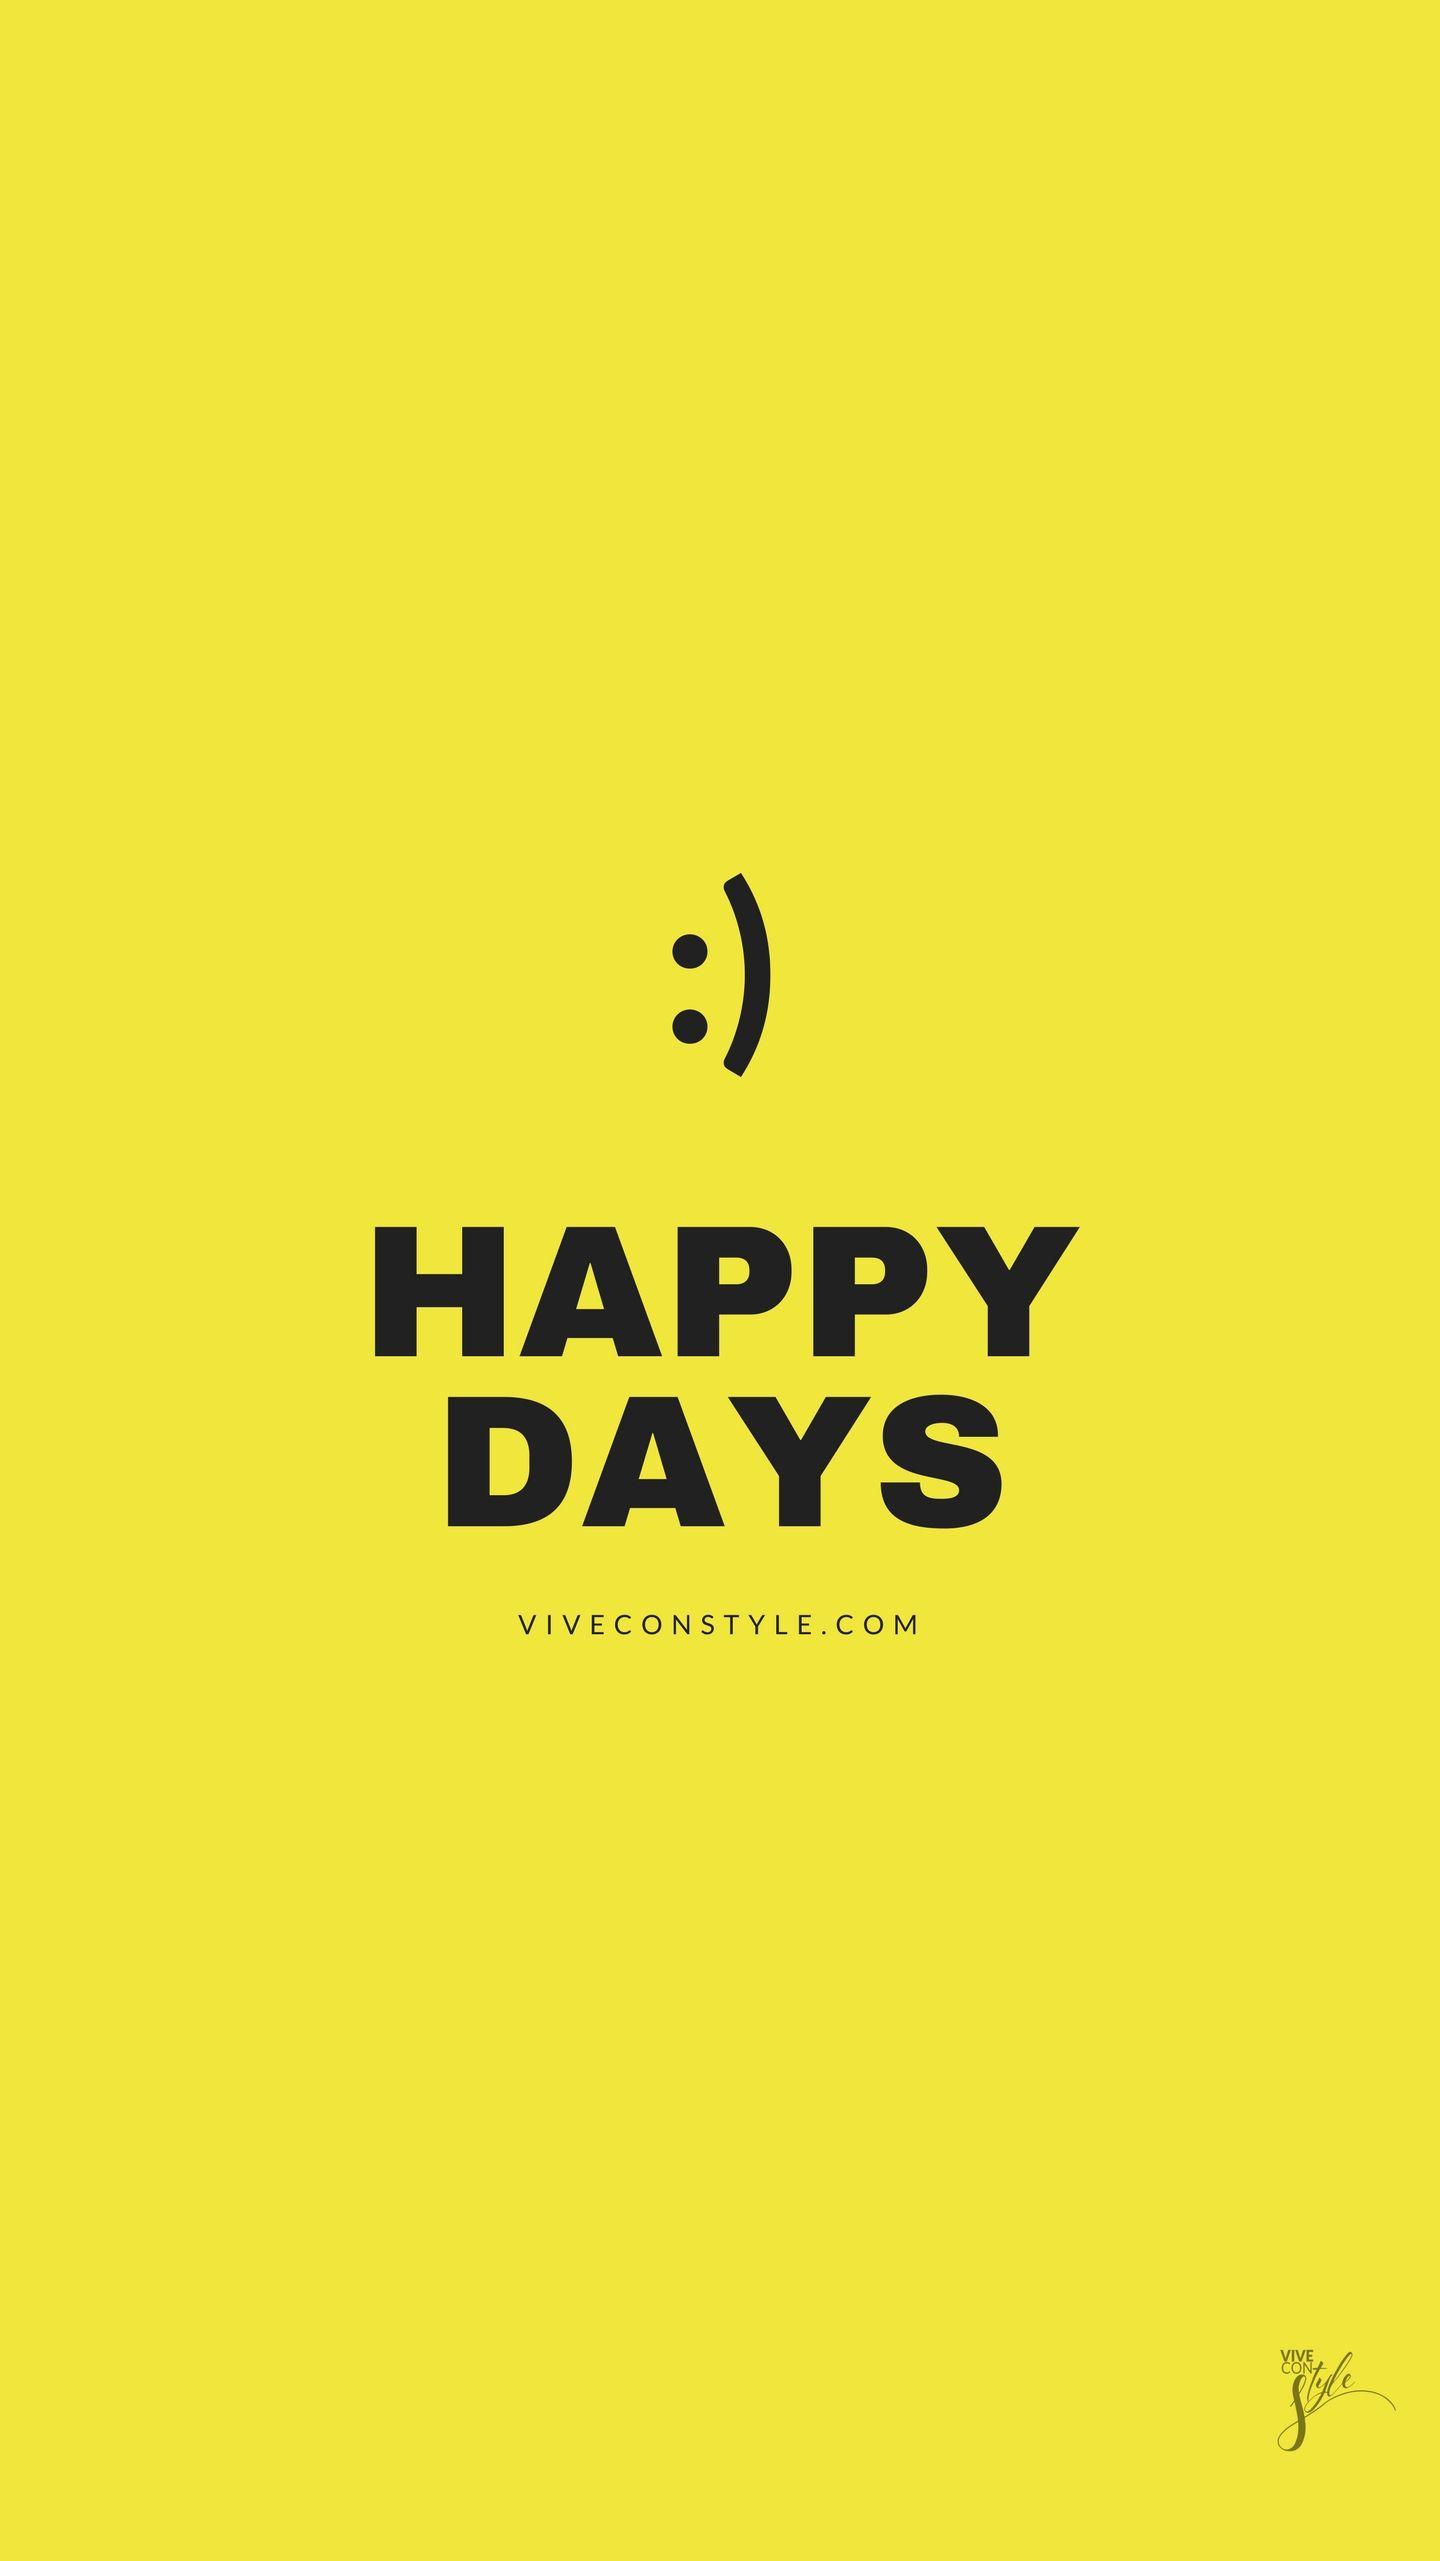 Happy days mobile wallpaper. Mobile wallpaper, Phone background patterns, Phone wallpaper